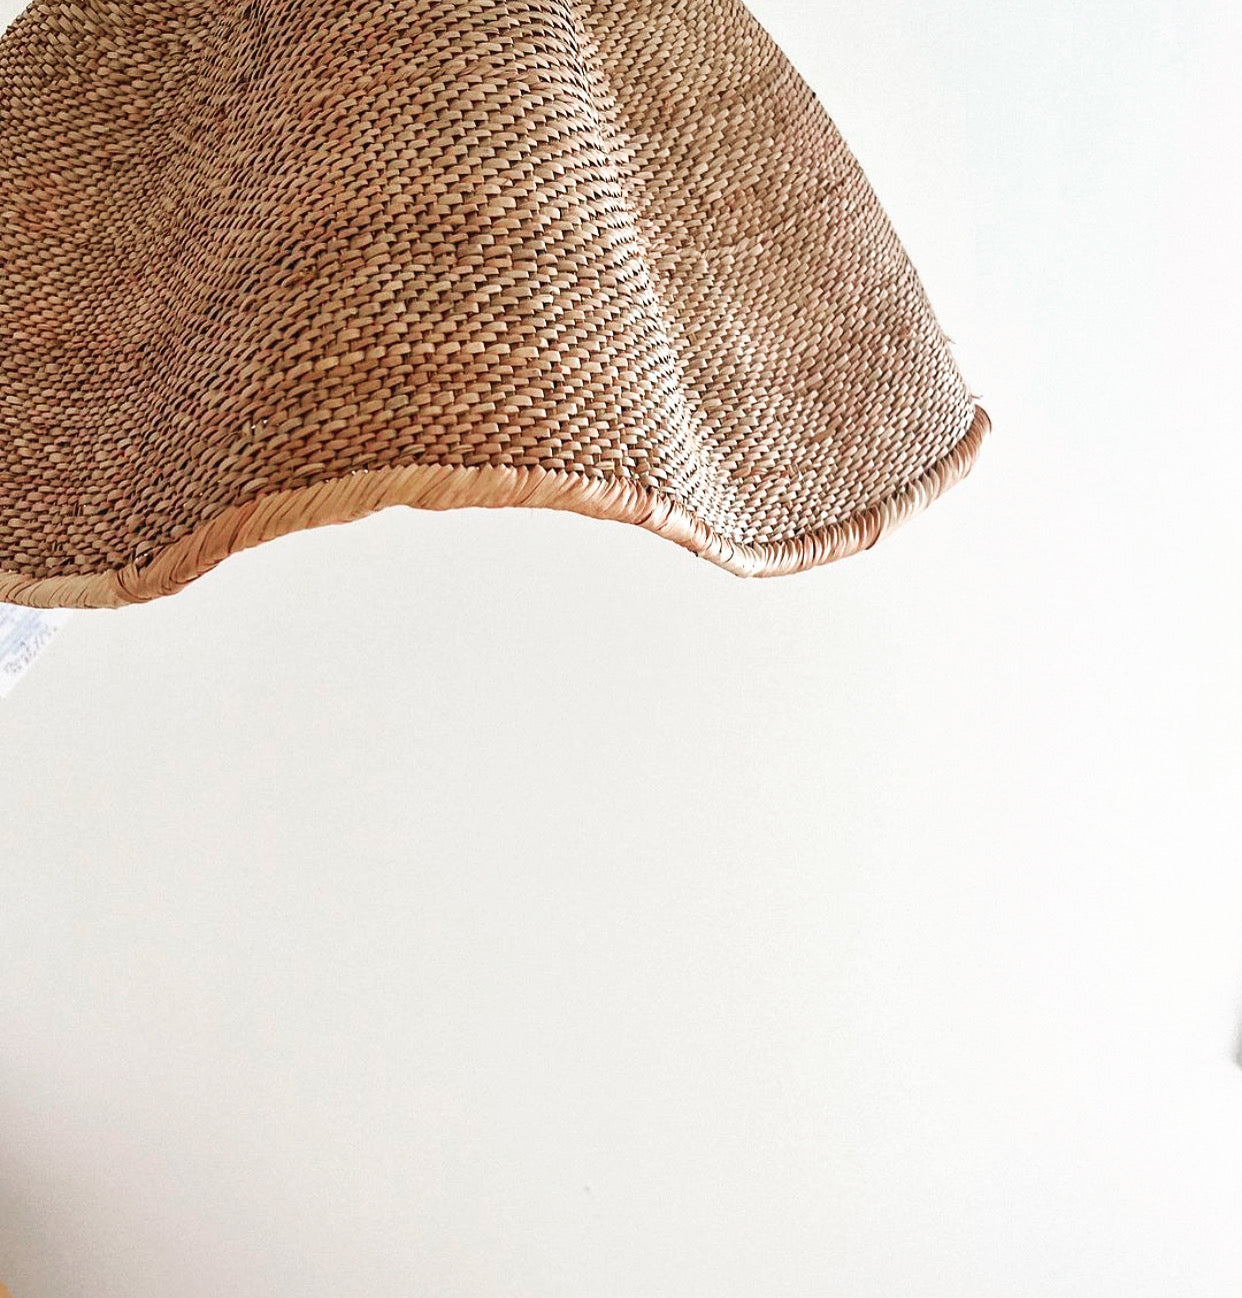 Care for Natural Fibre Baskets, Pendant Lights and Textiles